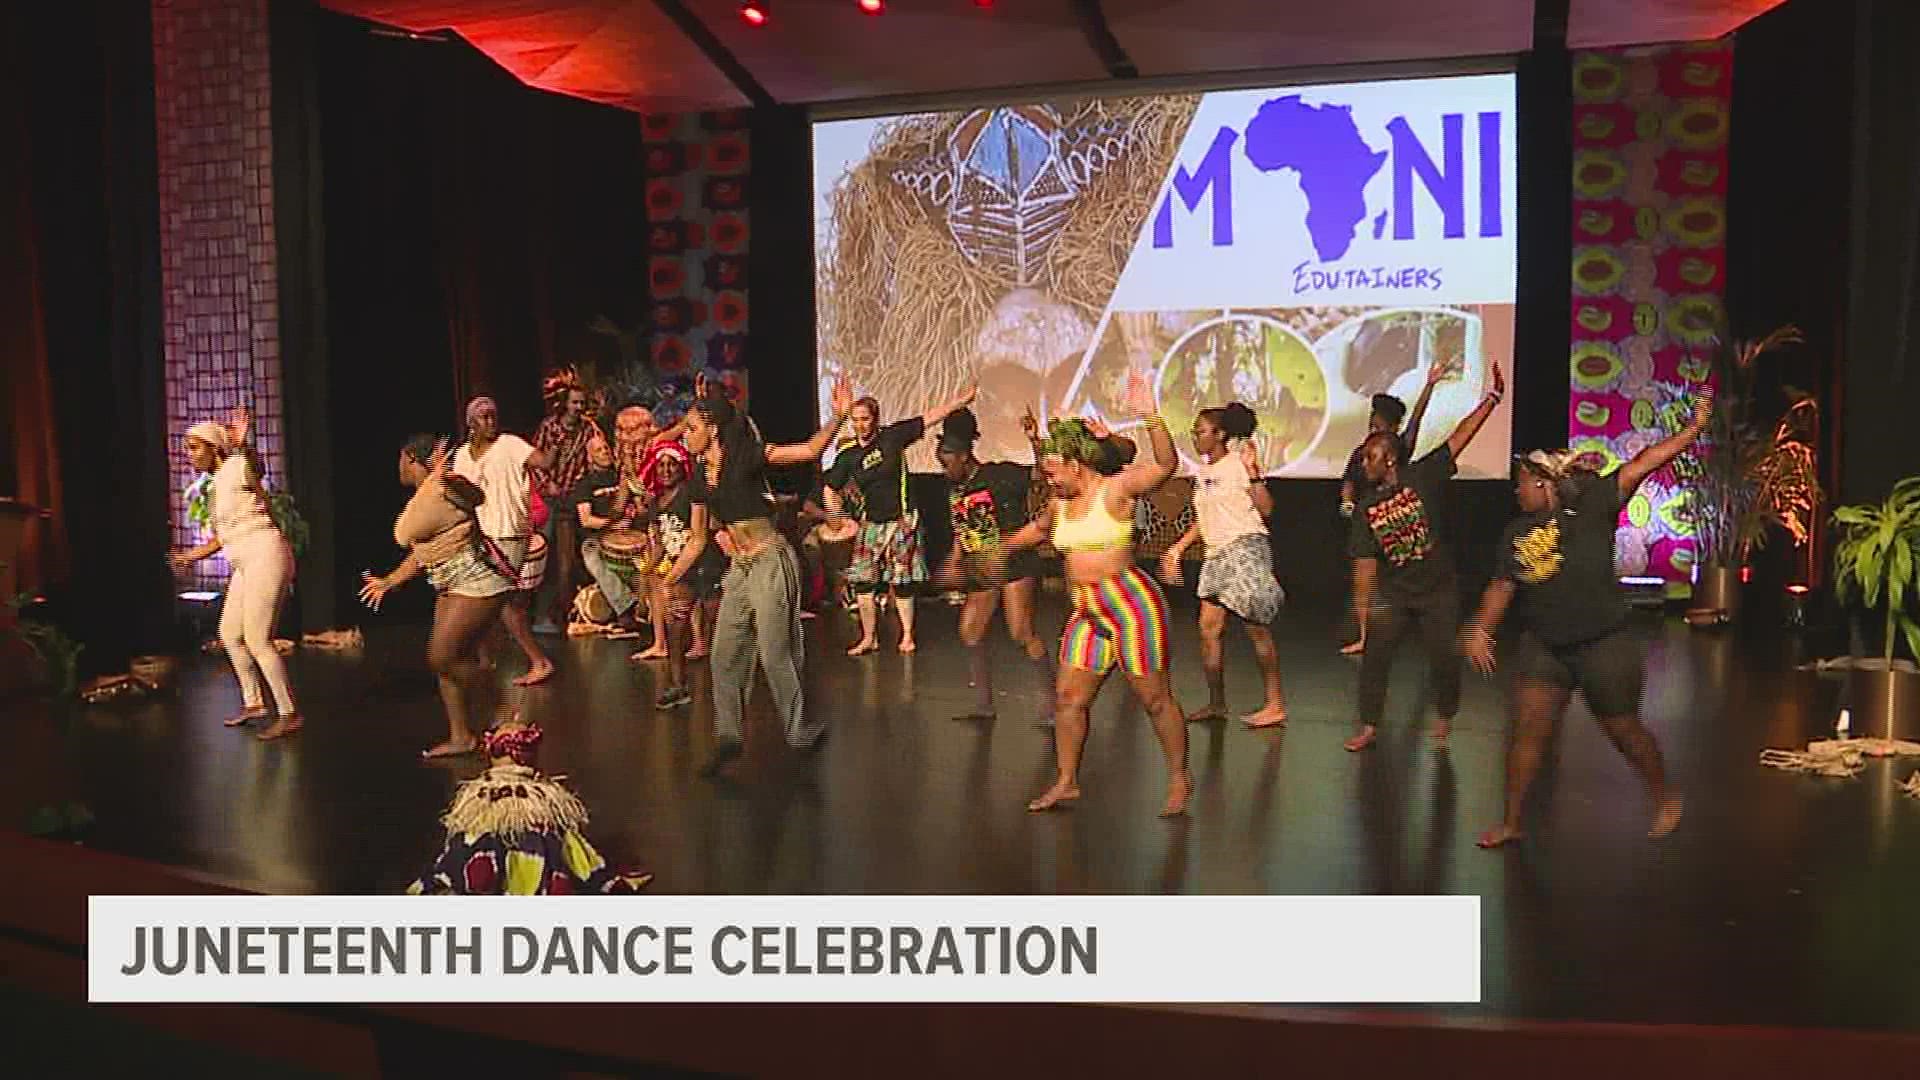 The Imani Edu-tainers presented Lancaster residents with a traditional African dance showcase